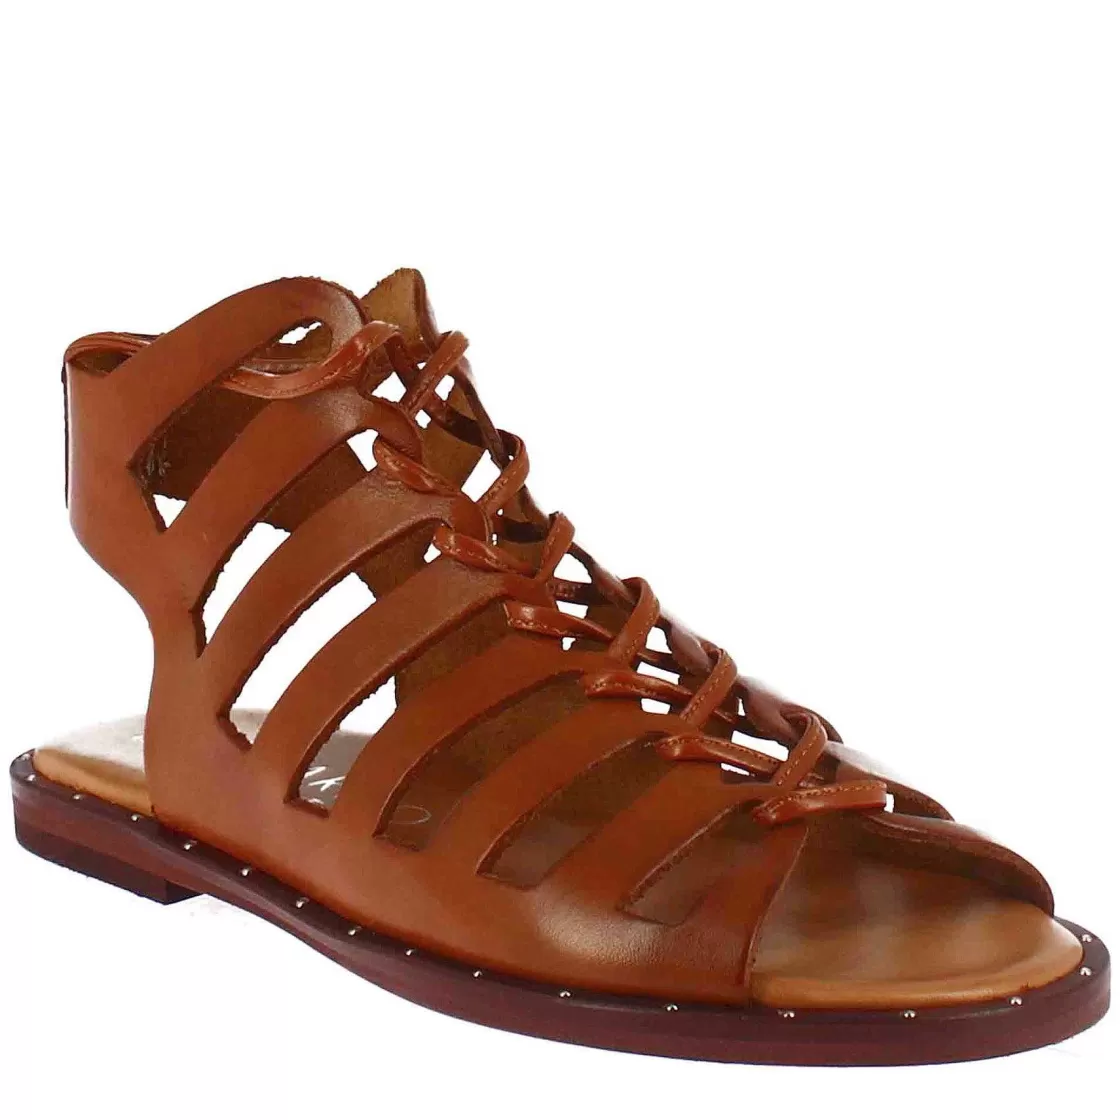 Leonardo Women'S Gladiator Sandal With Handmade Laces In Brown Leather New